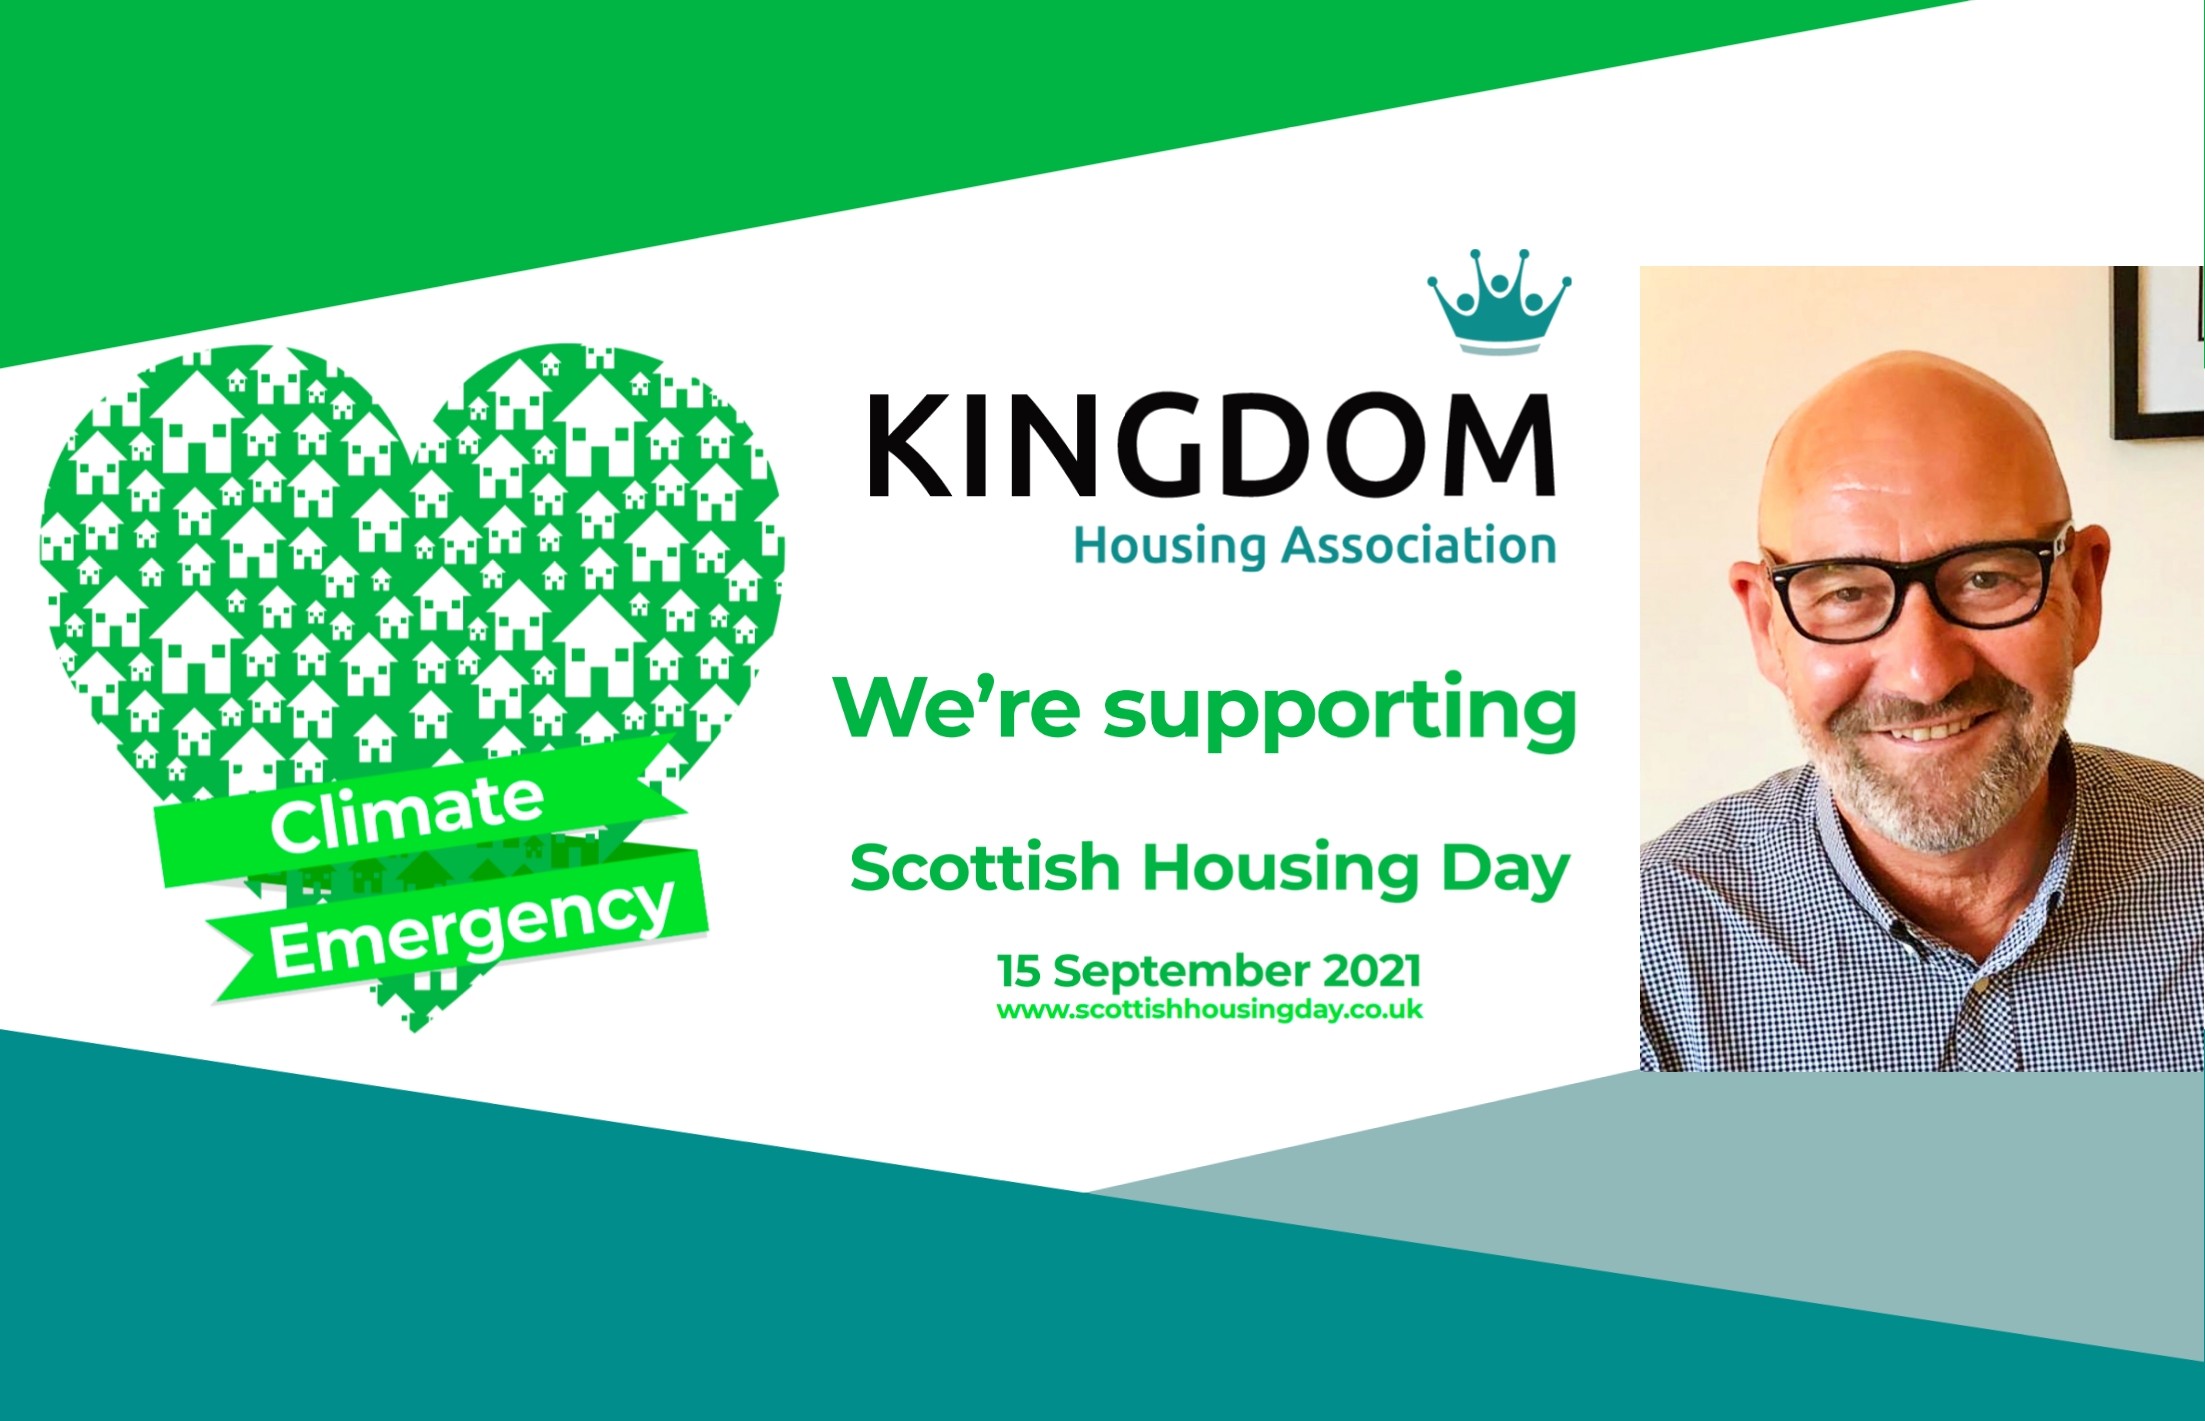 Bill Banks: Kingdom Housing Association is proud to be part of Scottish Housing Day 2021